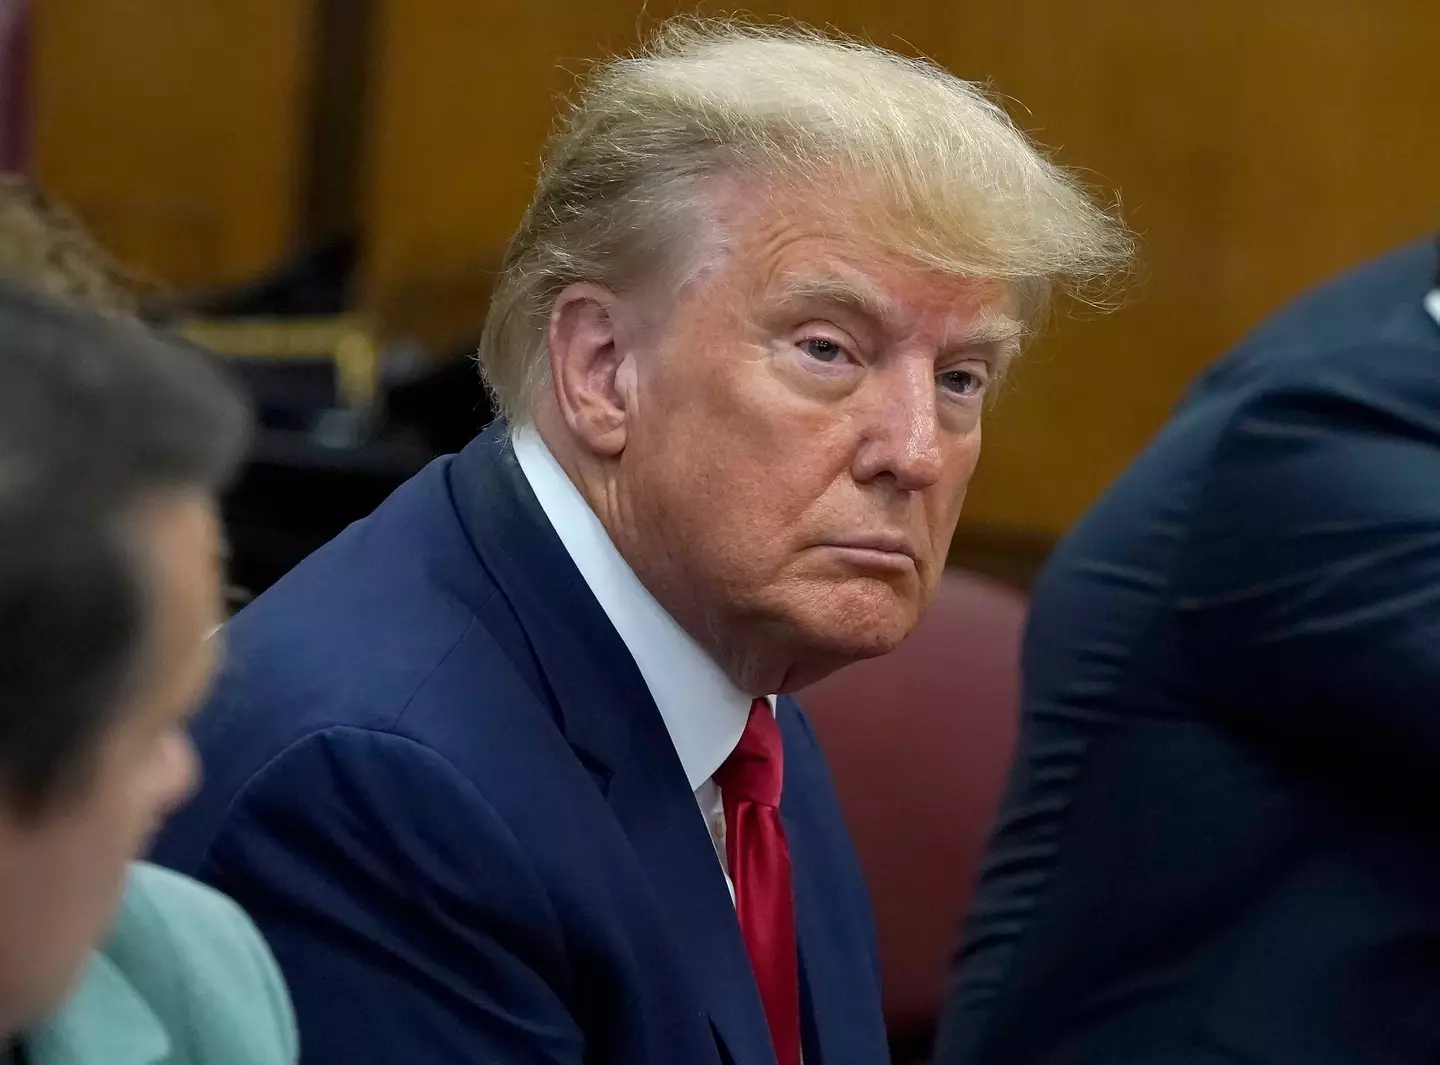 former U.S. President Donald Trump attends a pre-trial hearing at Manhattan Criminal Court on February 15.